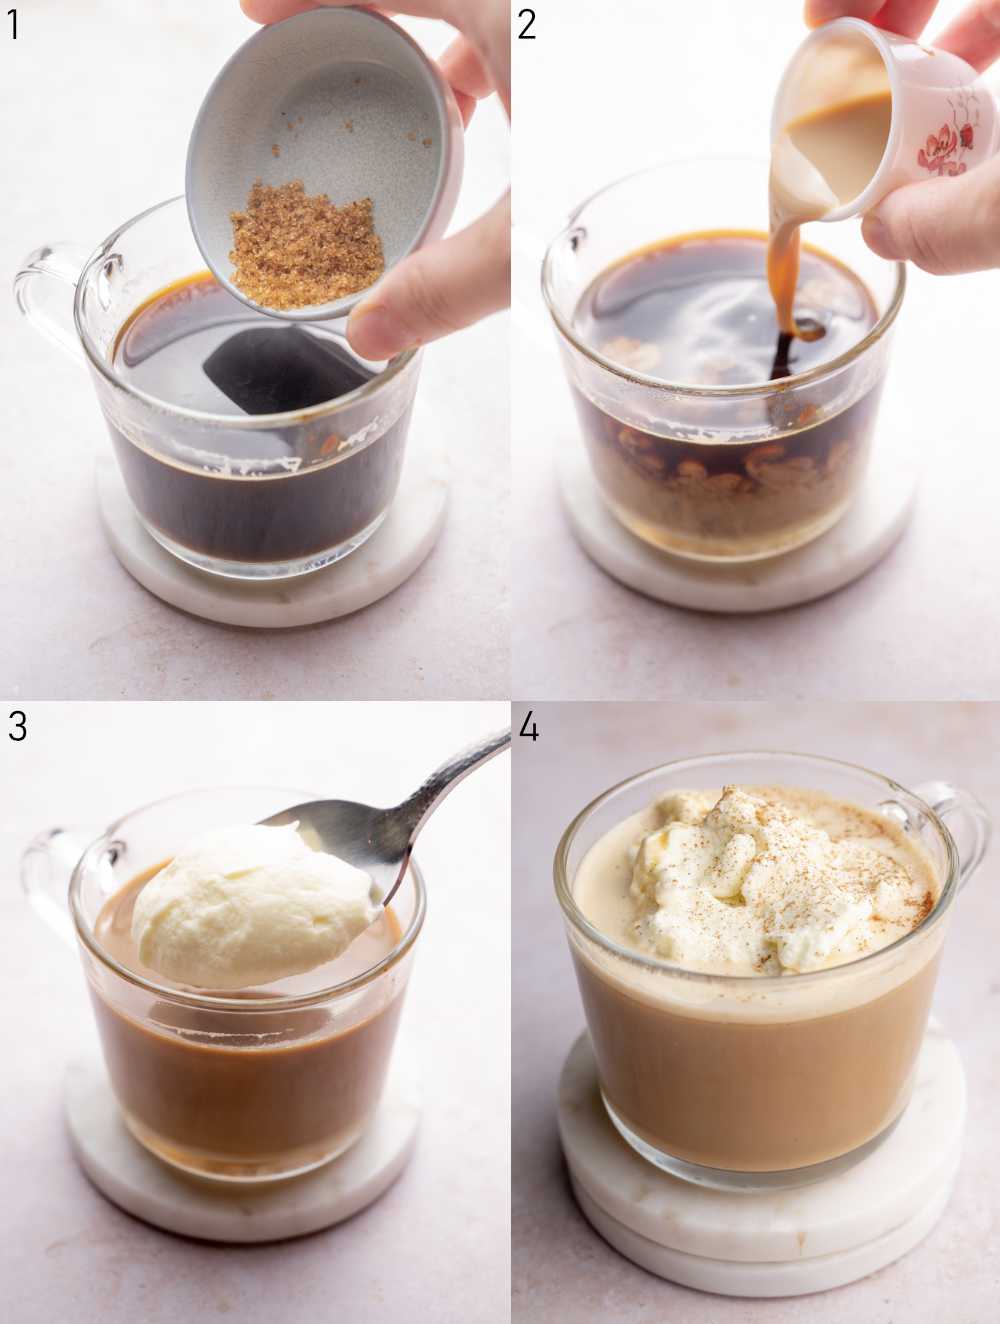 A collage of 4 photos showing how to make Baileys coffee step by step.